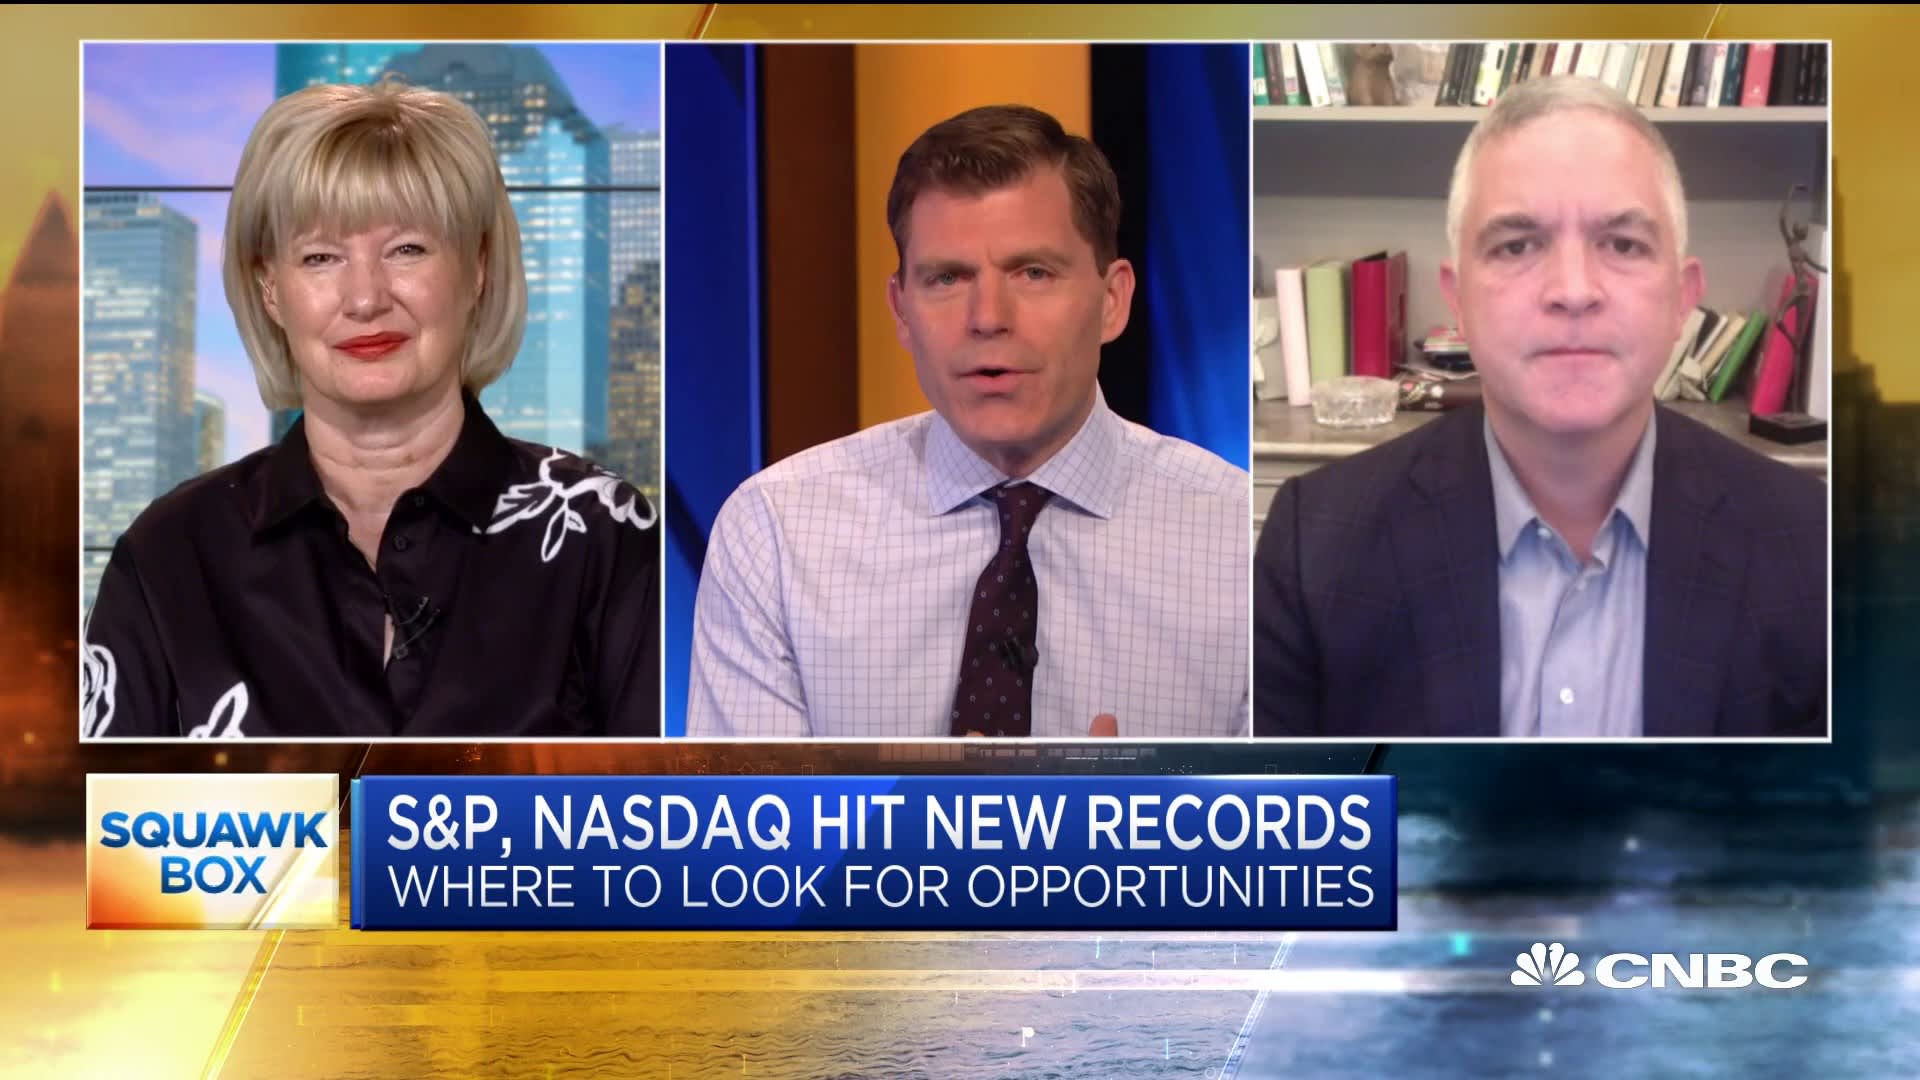 Two pros on investment opportunities as the S&P 500, Nasdaq hit new records